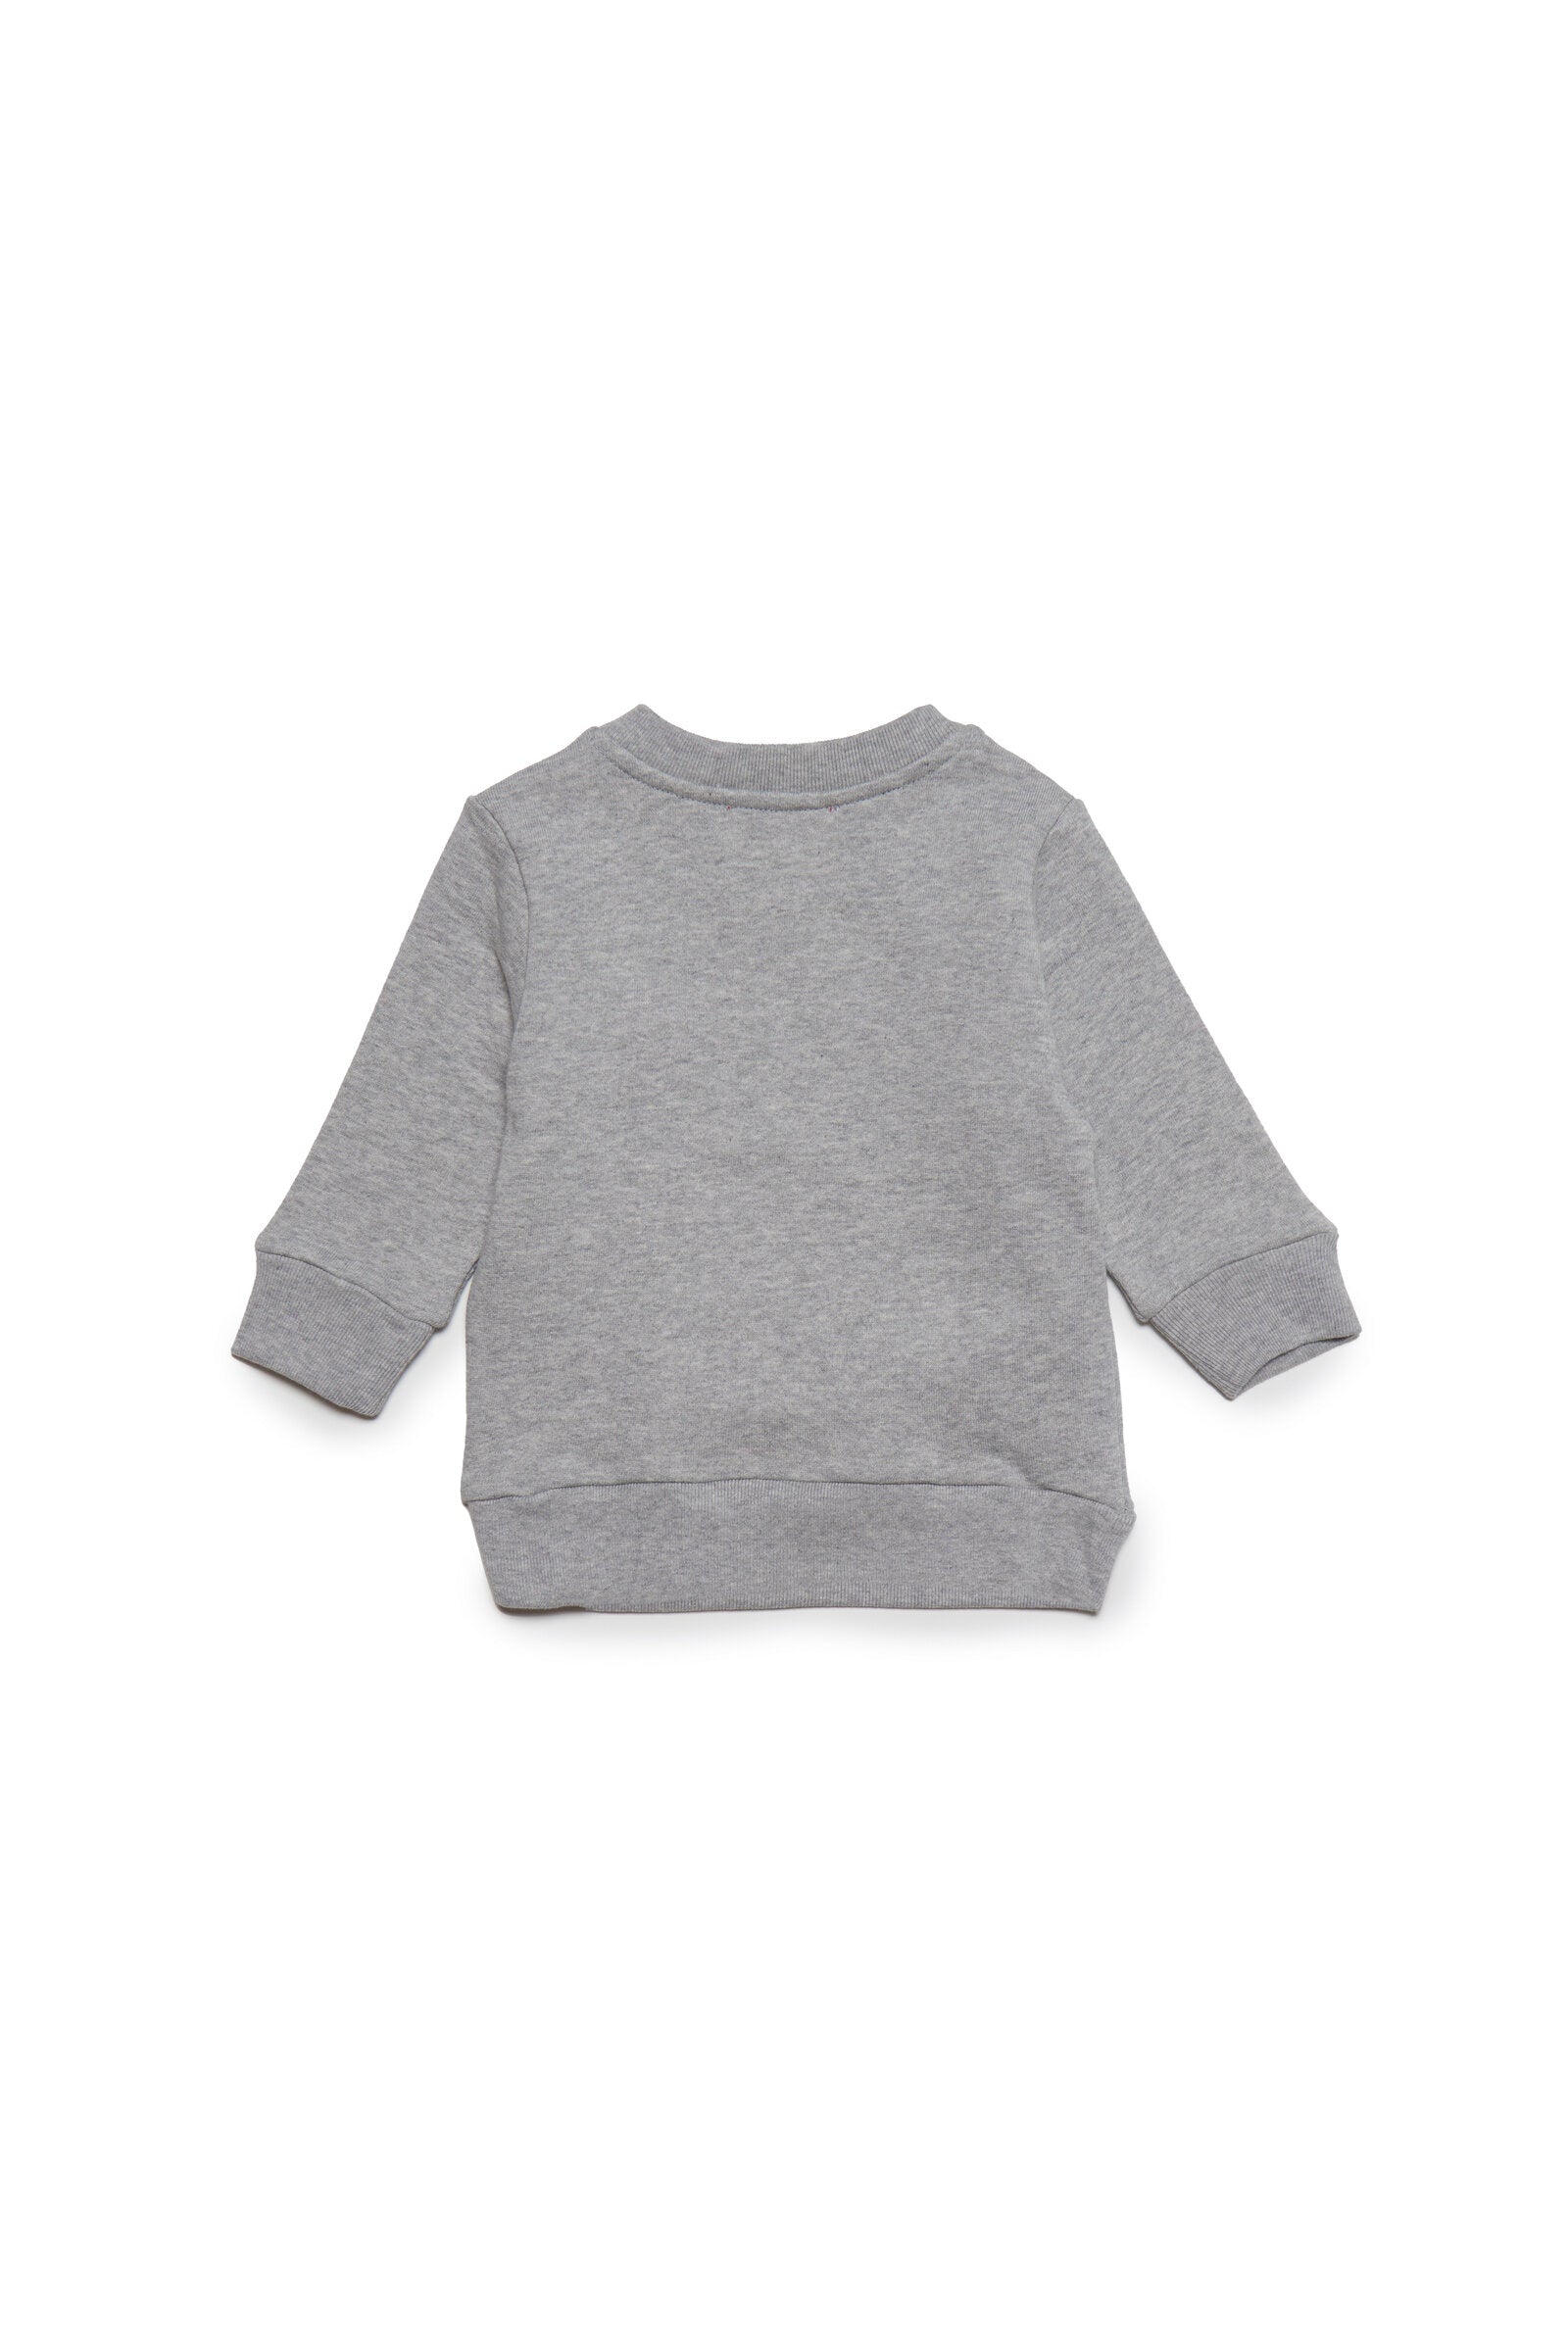 Gray sweatshirt with Diesel double logo and press stud fastening